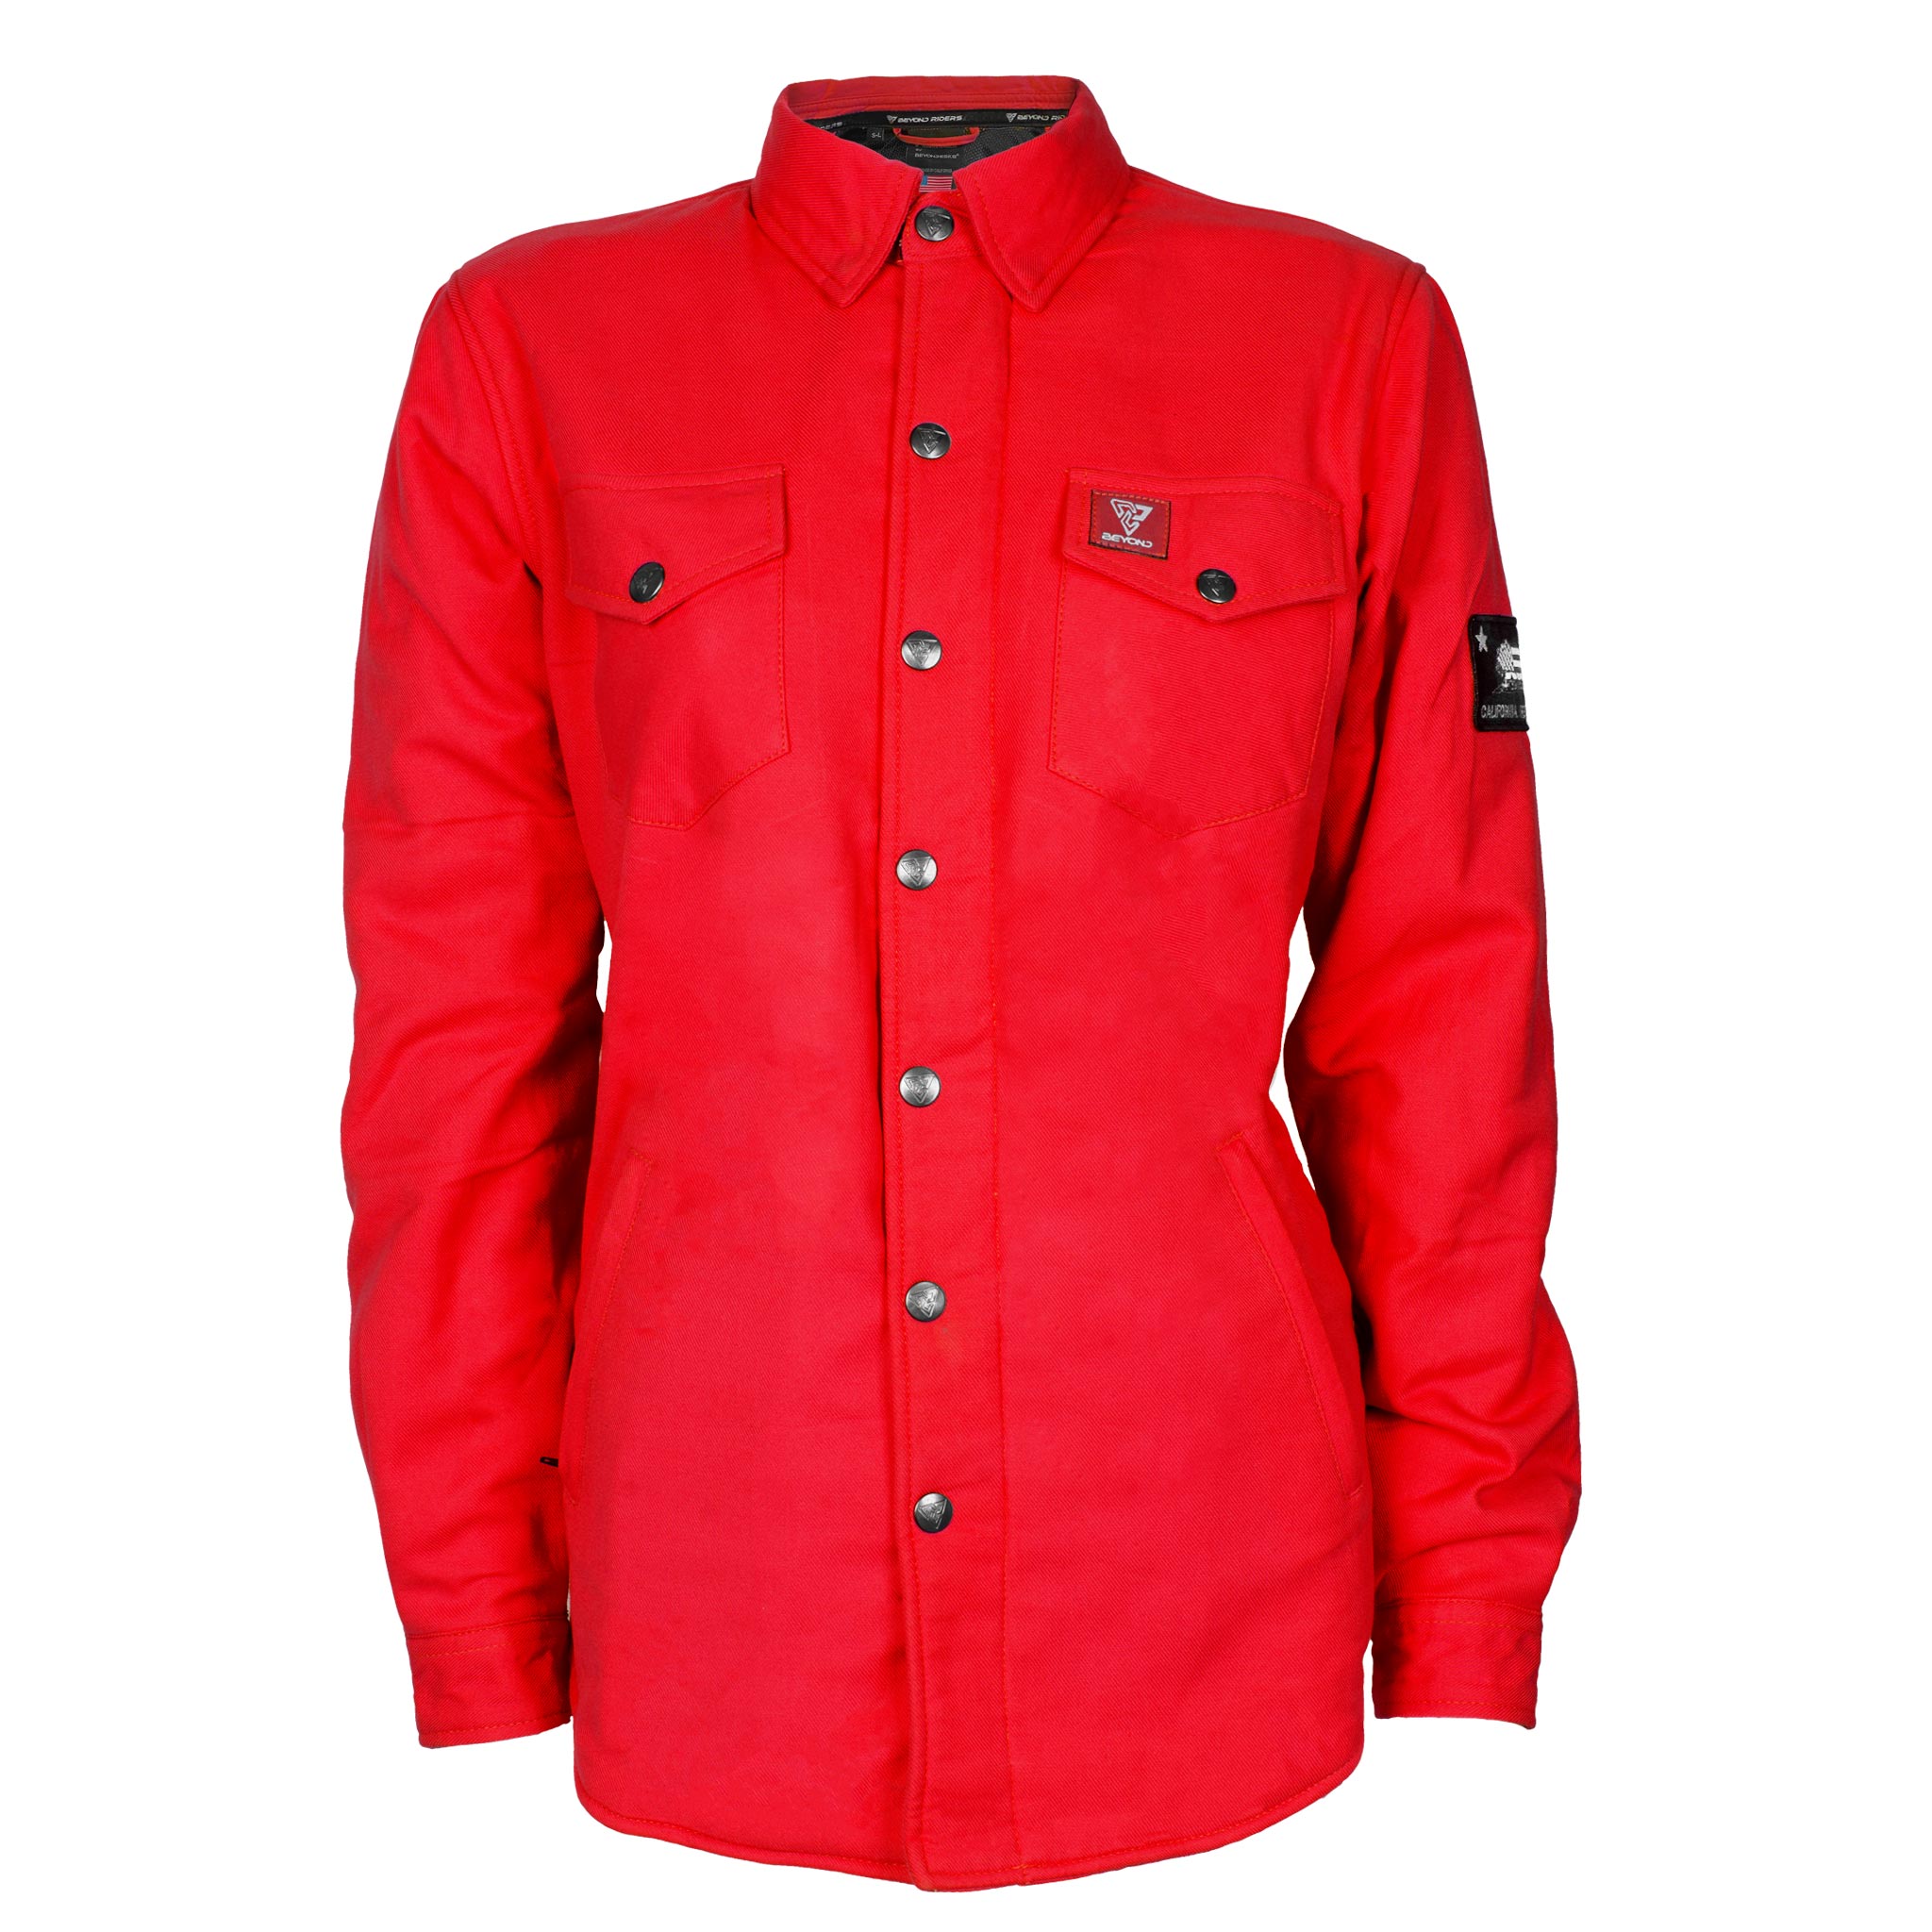 Protective Flannel Shirt for Women - Red Solid with Pads